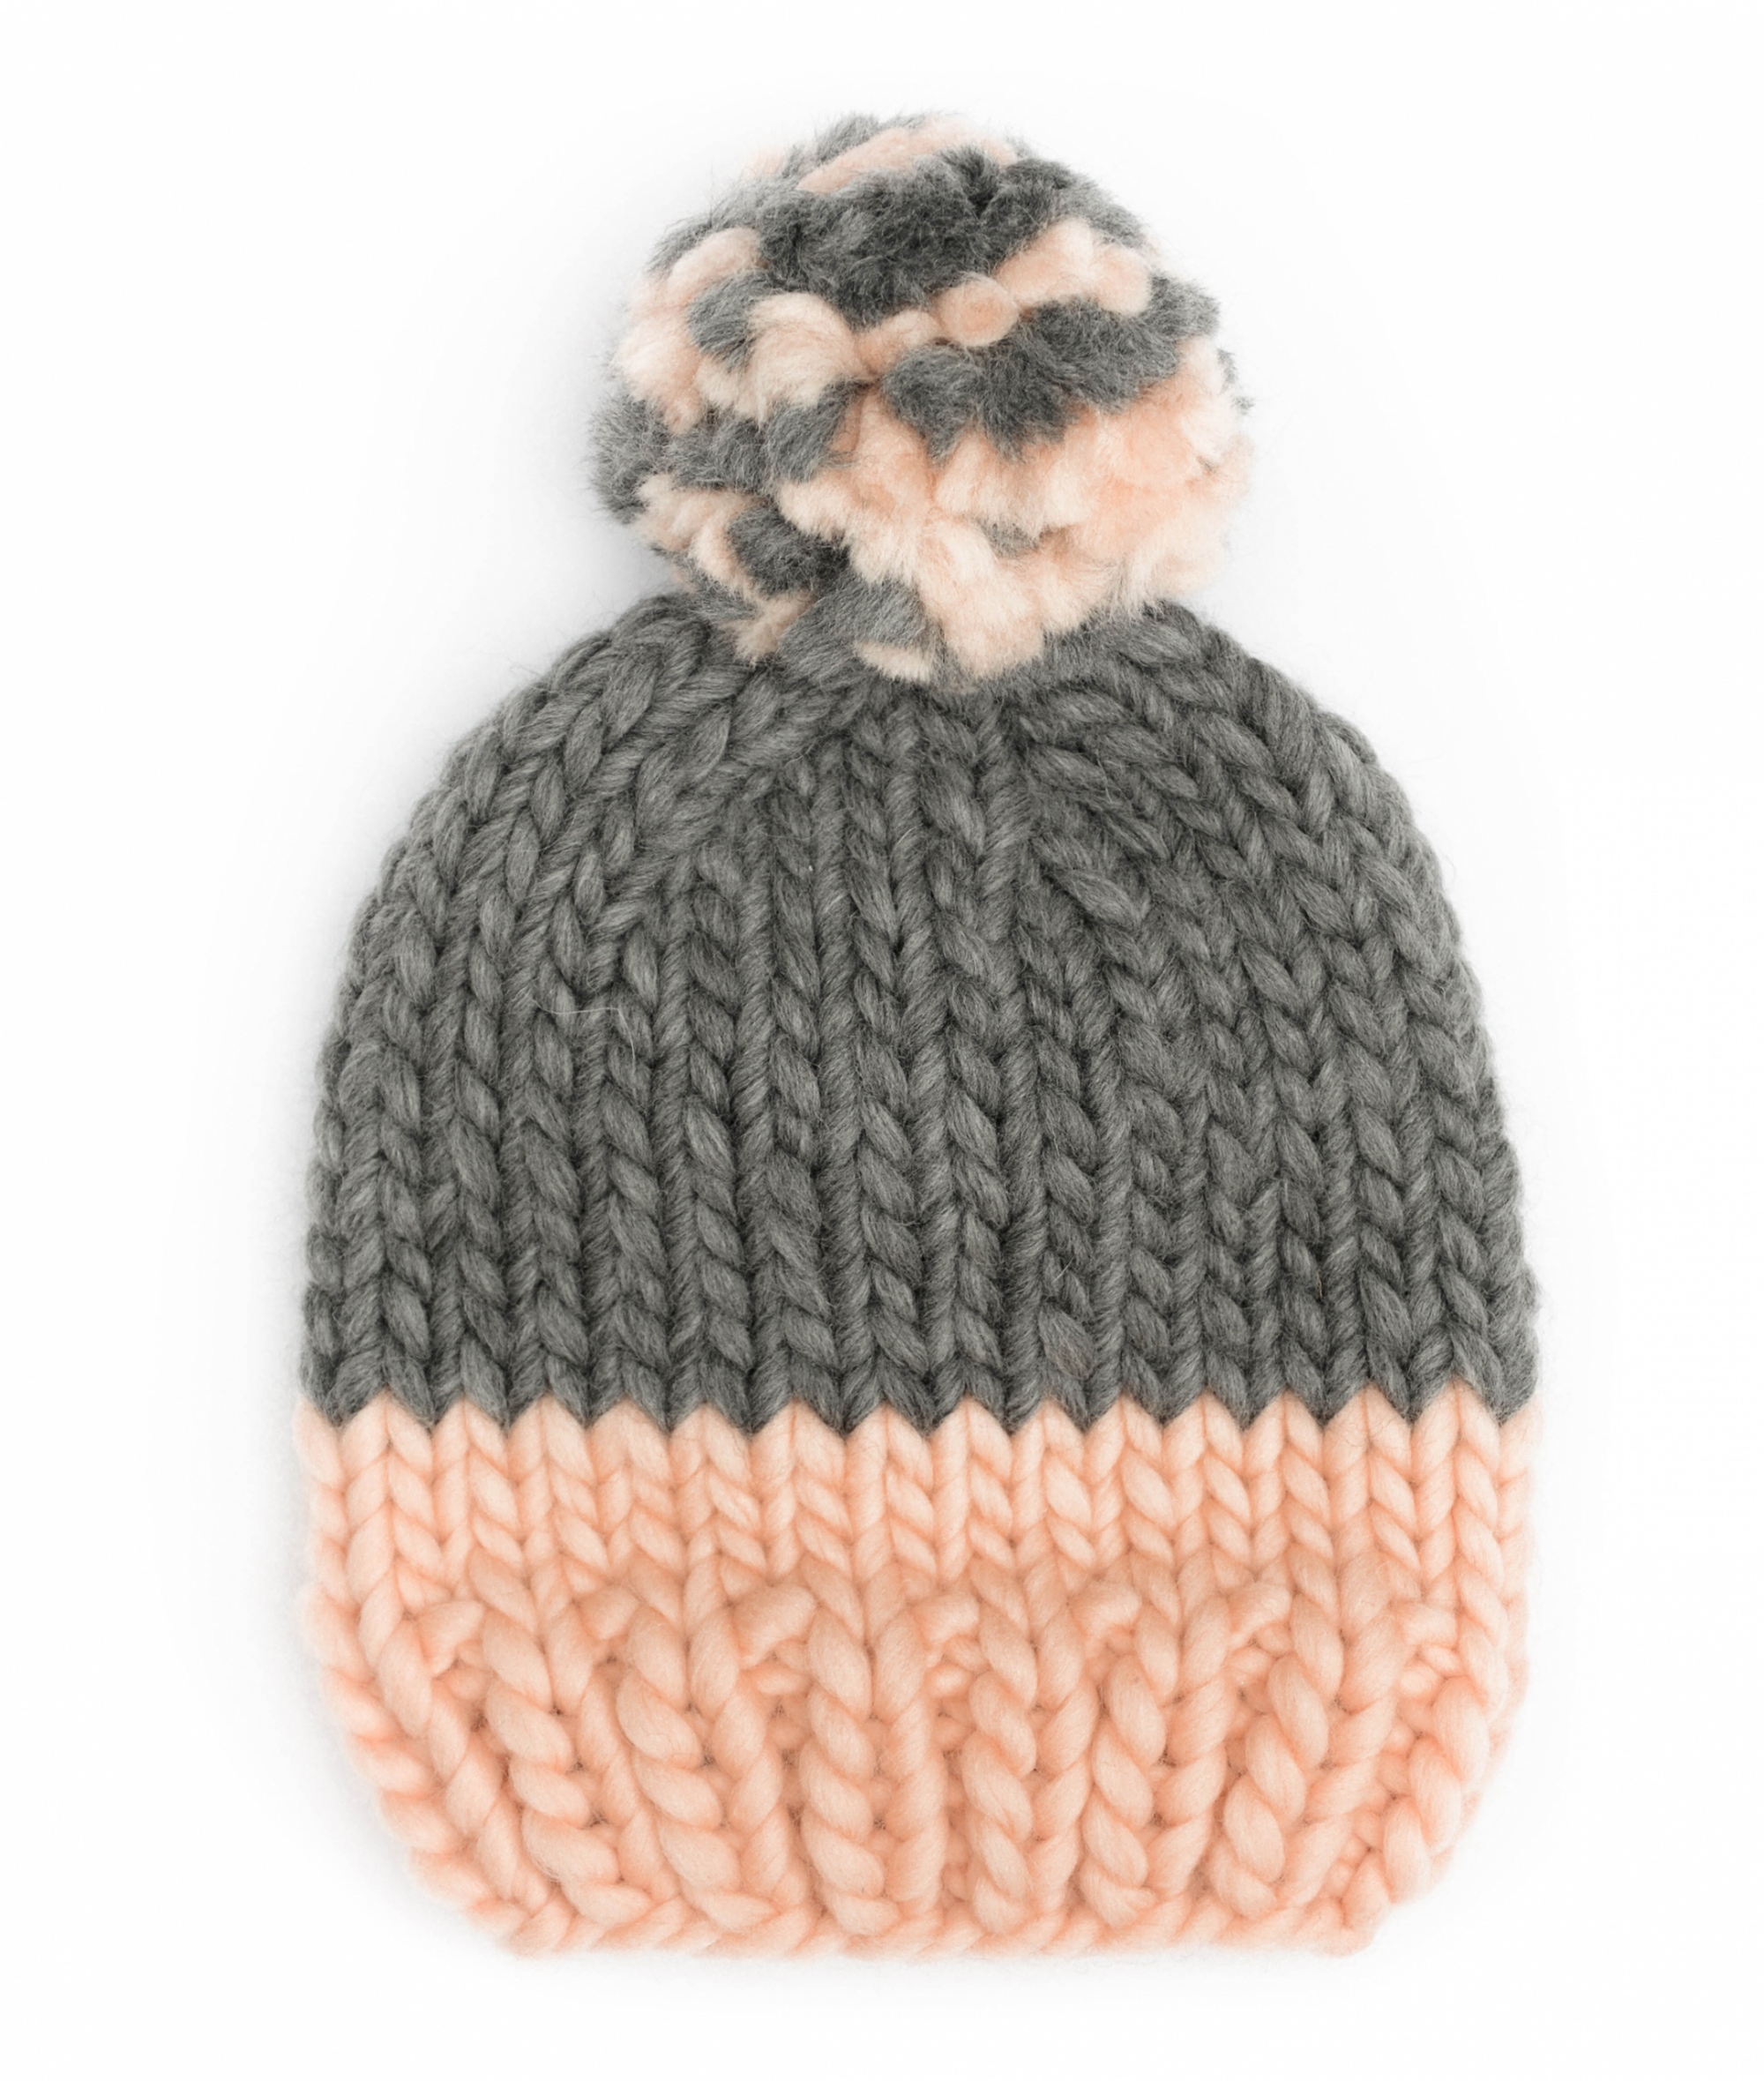 Handmade wool hats - Peach and grey block colour bobble hat. Click to customise.